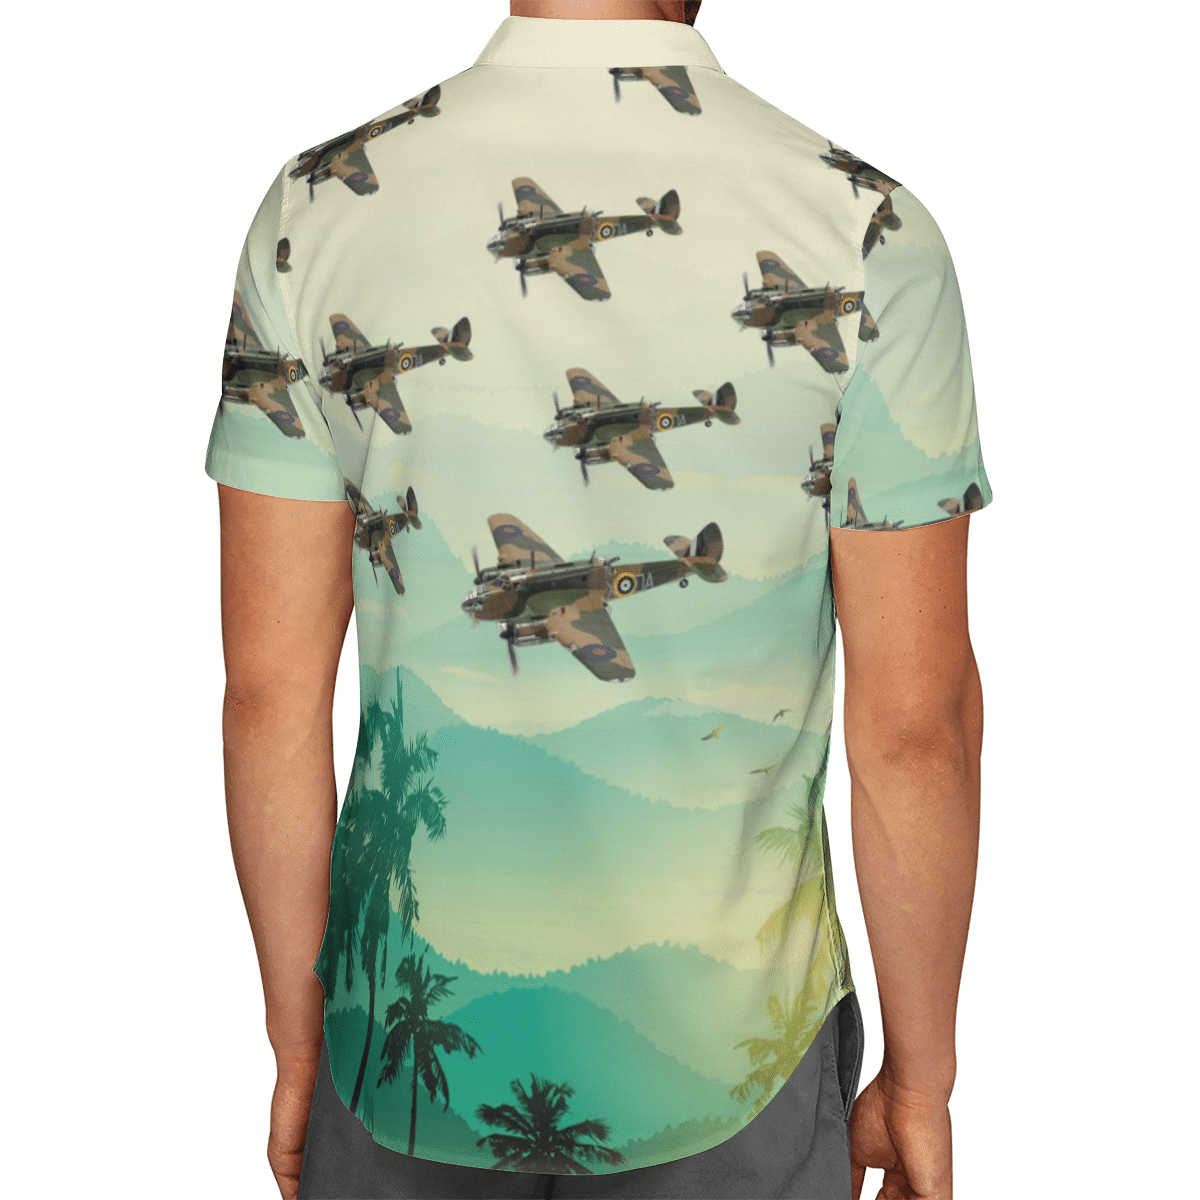 Going to the beach with a quality shirt 156